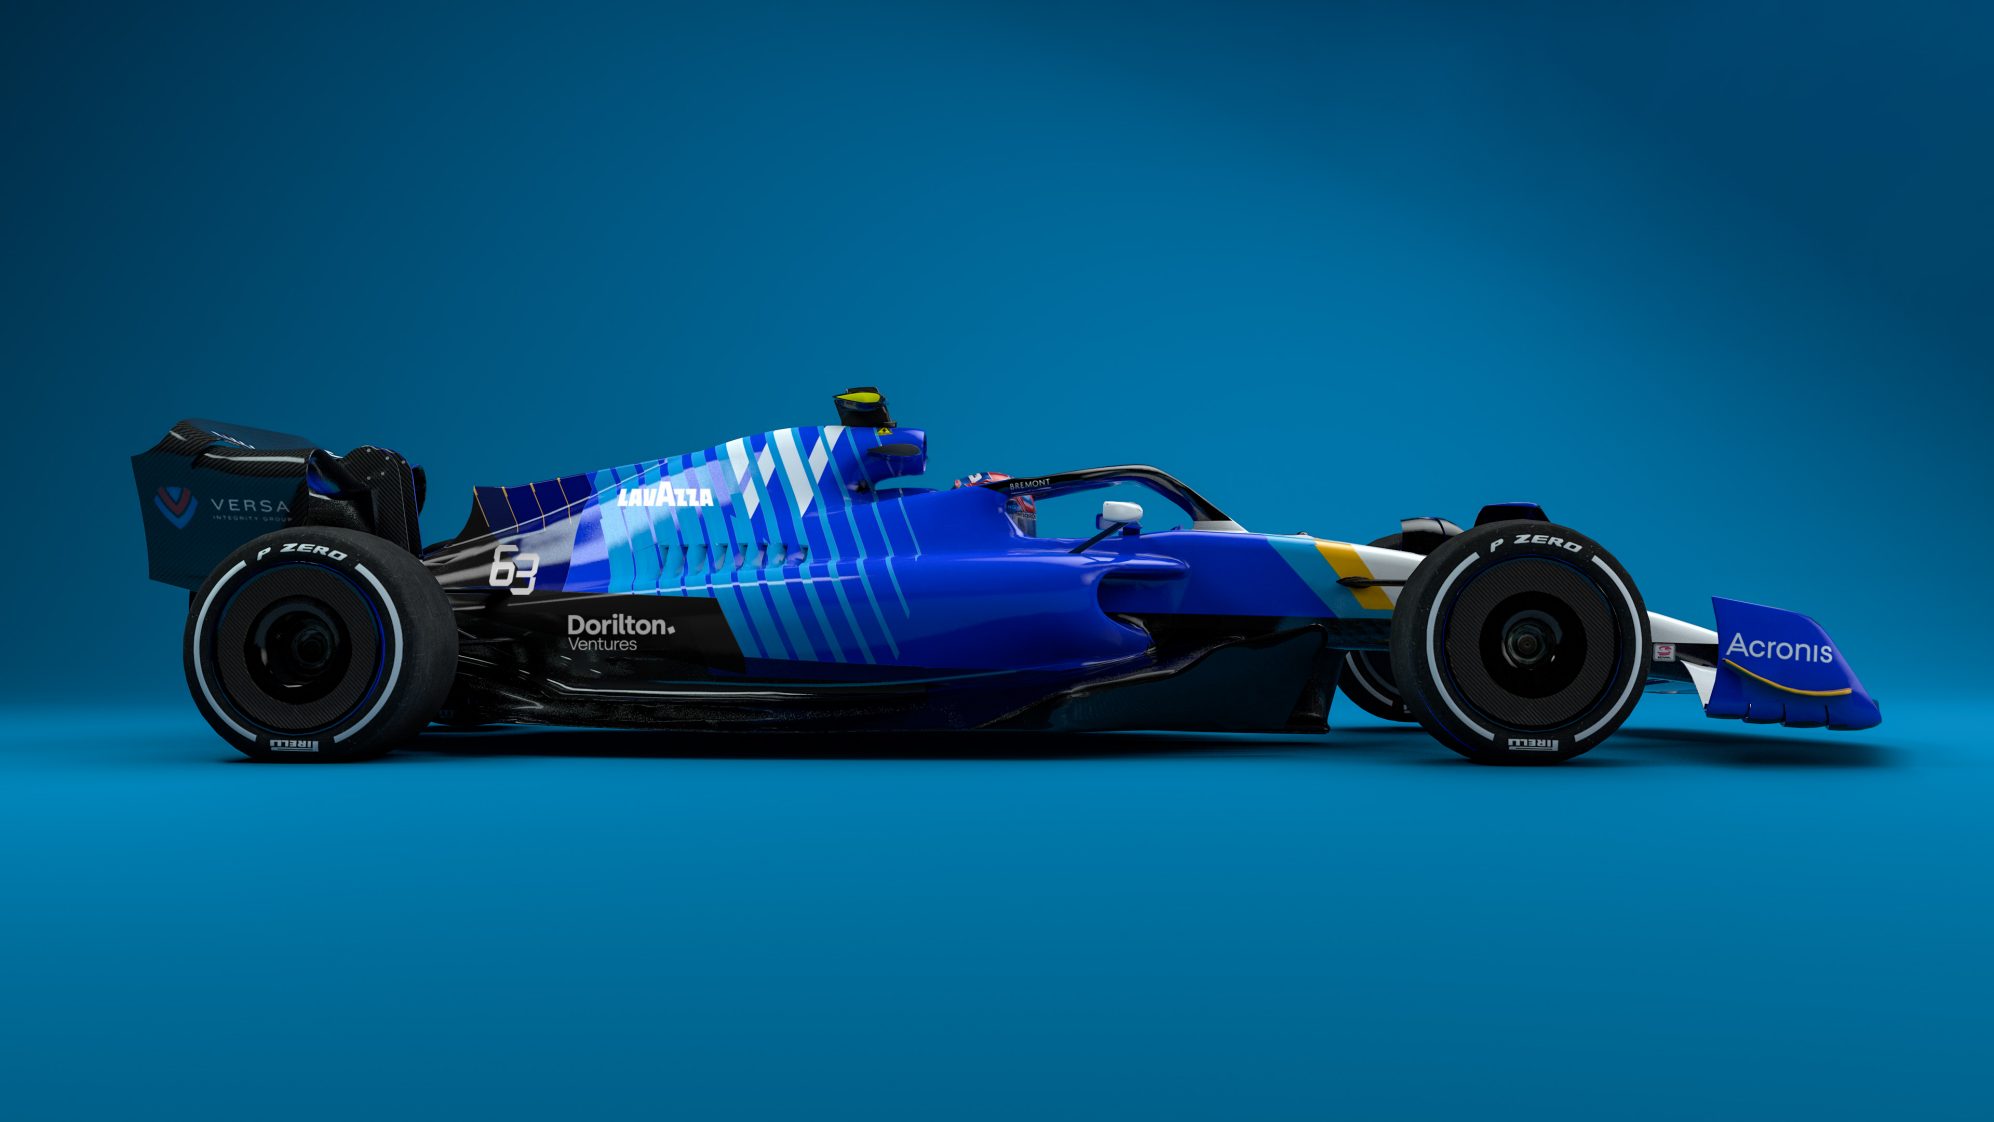 Williams Racing HD Wallpaper and Background